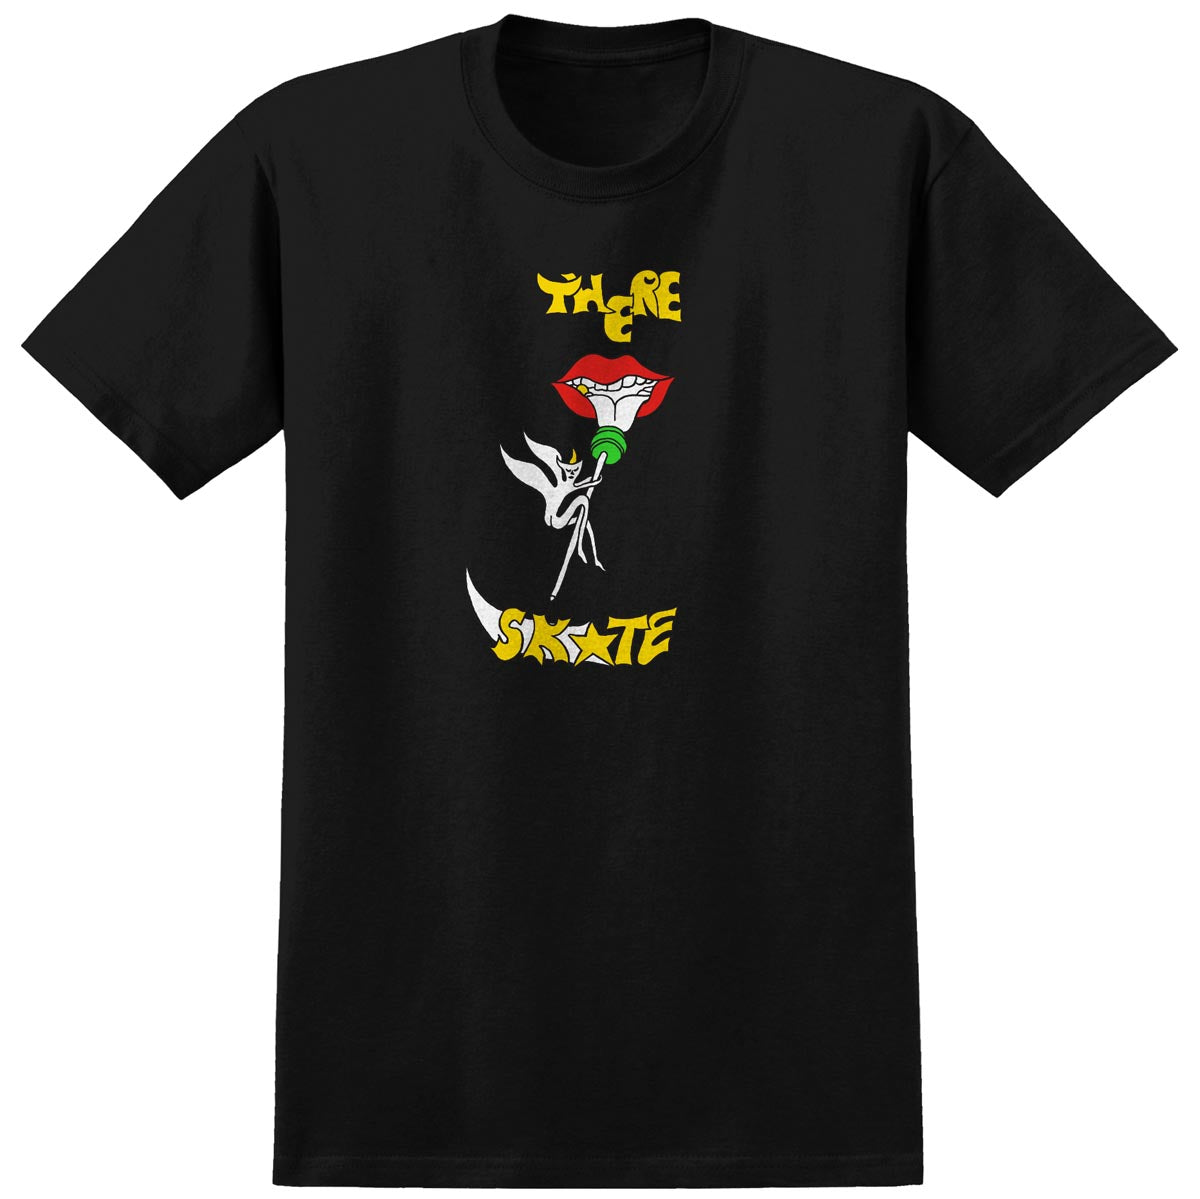 There Candyland T-Shirt - Black image 1